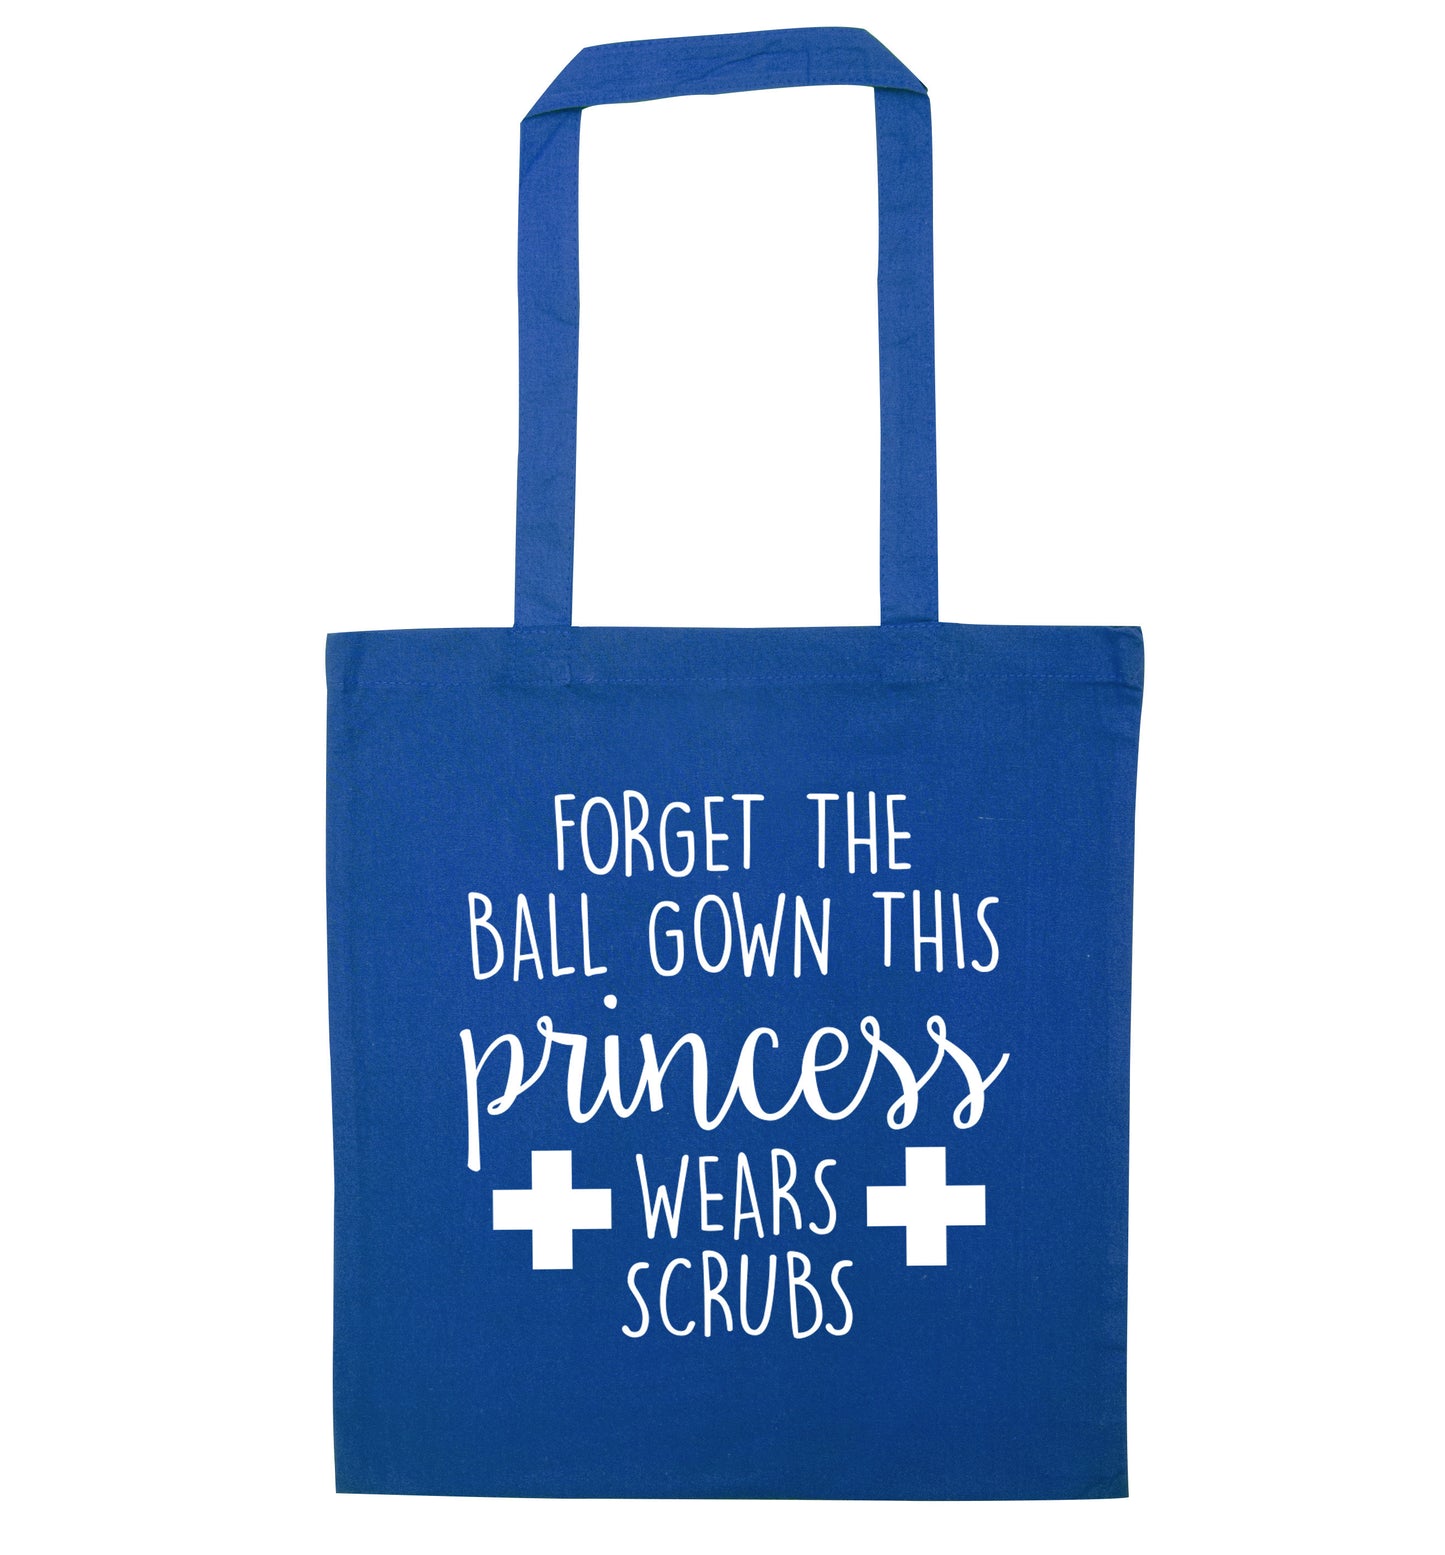 Forget the ball gown this princess wears scrubs blue tote bag